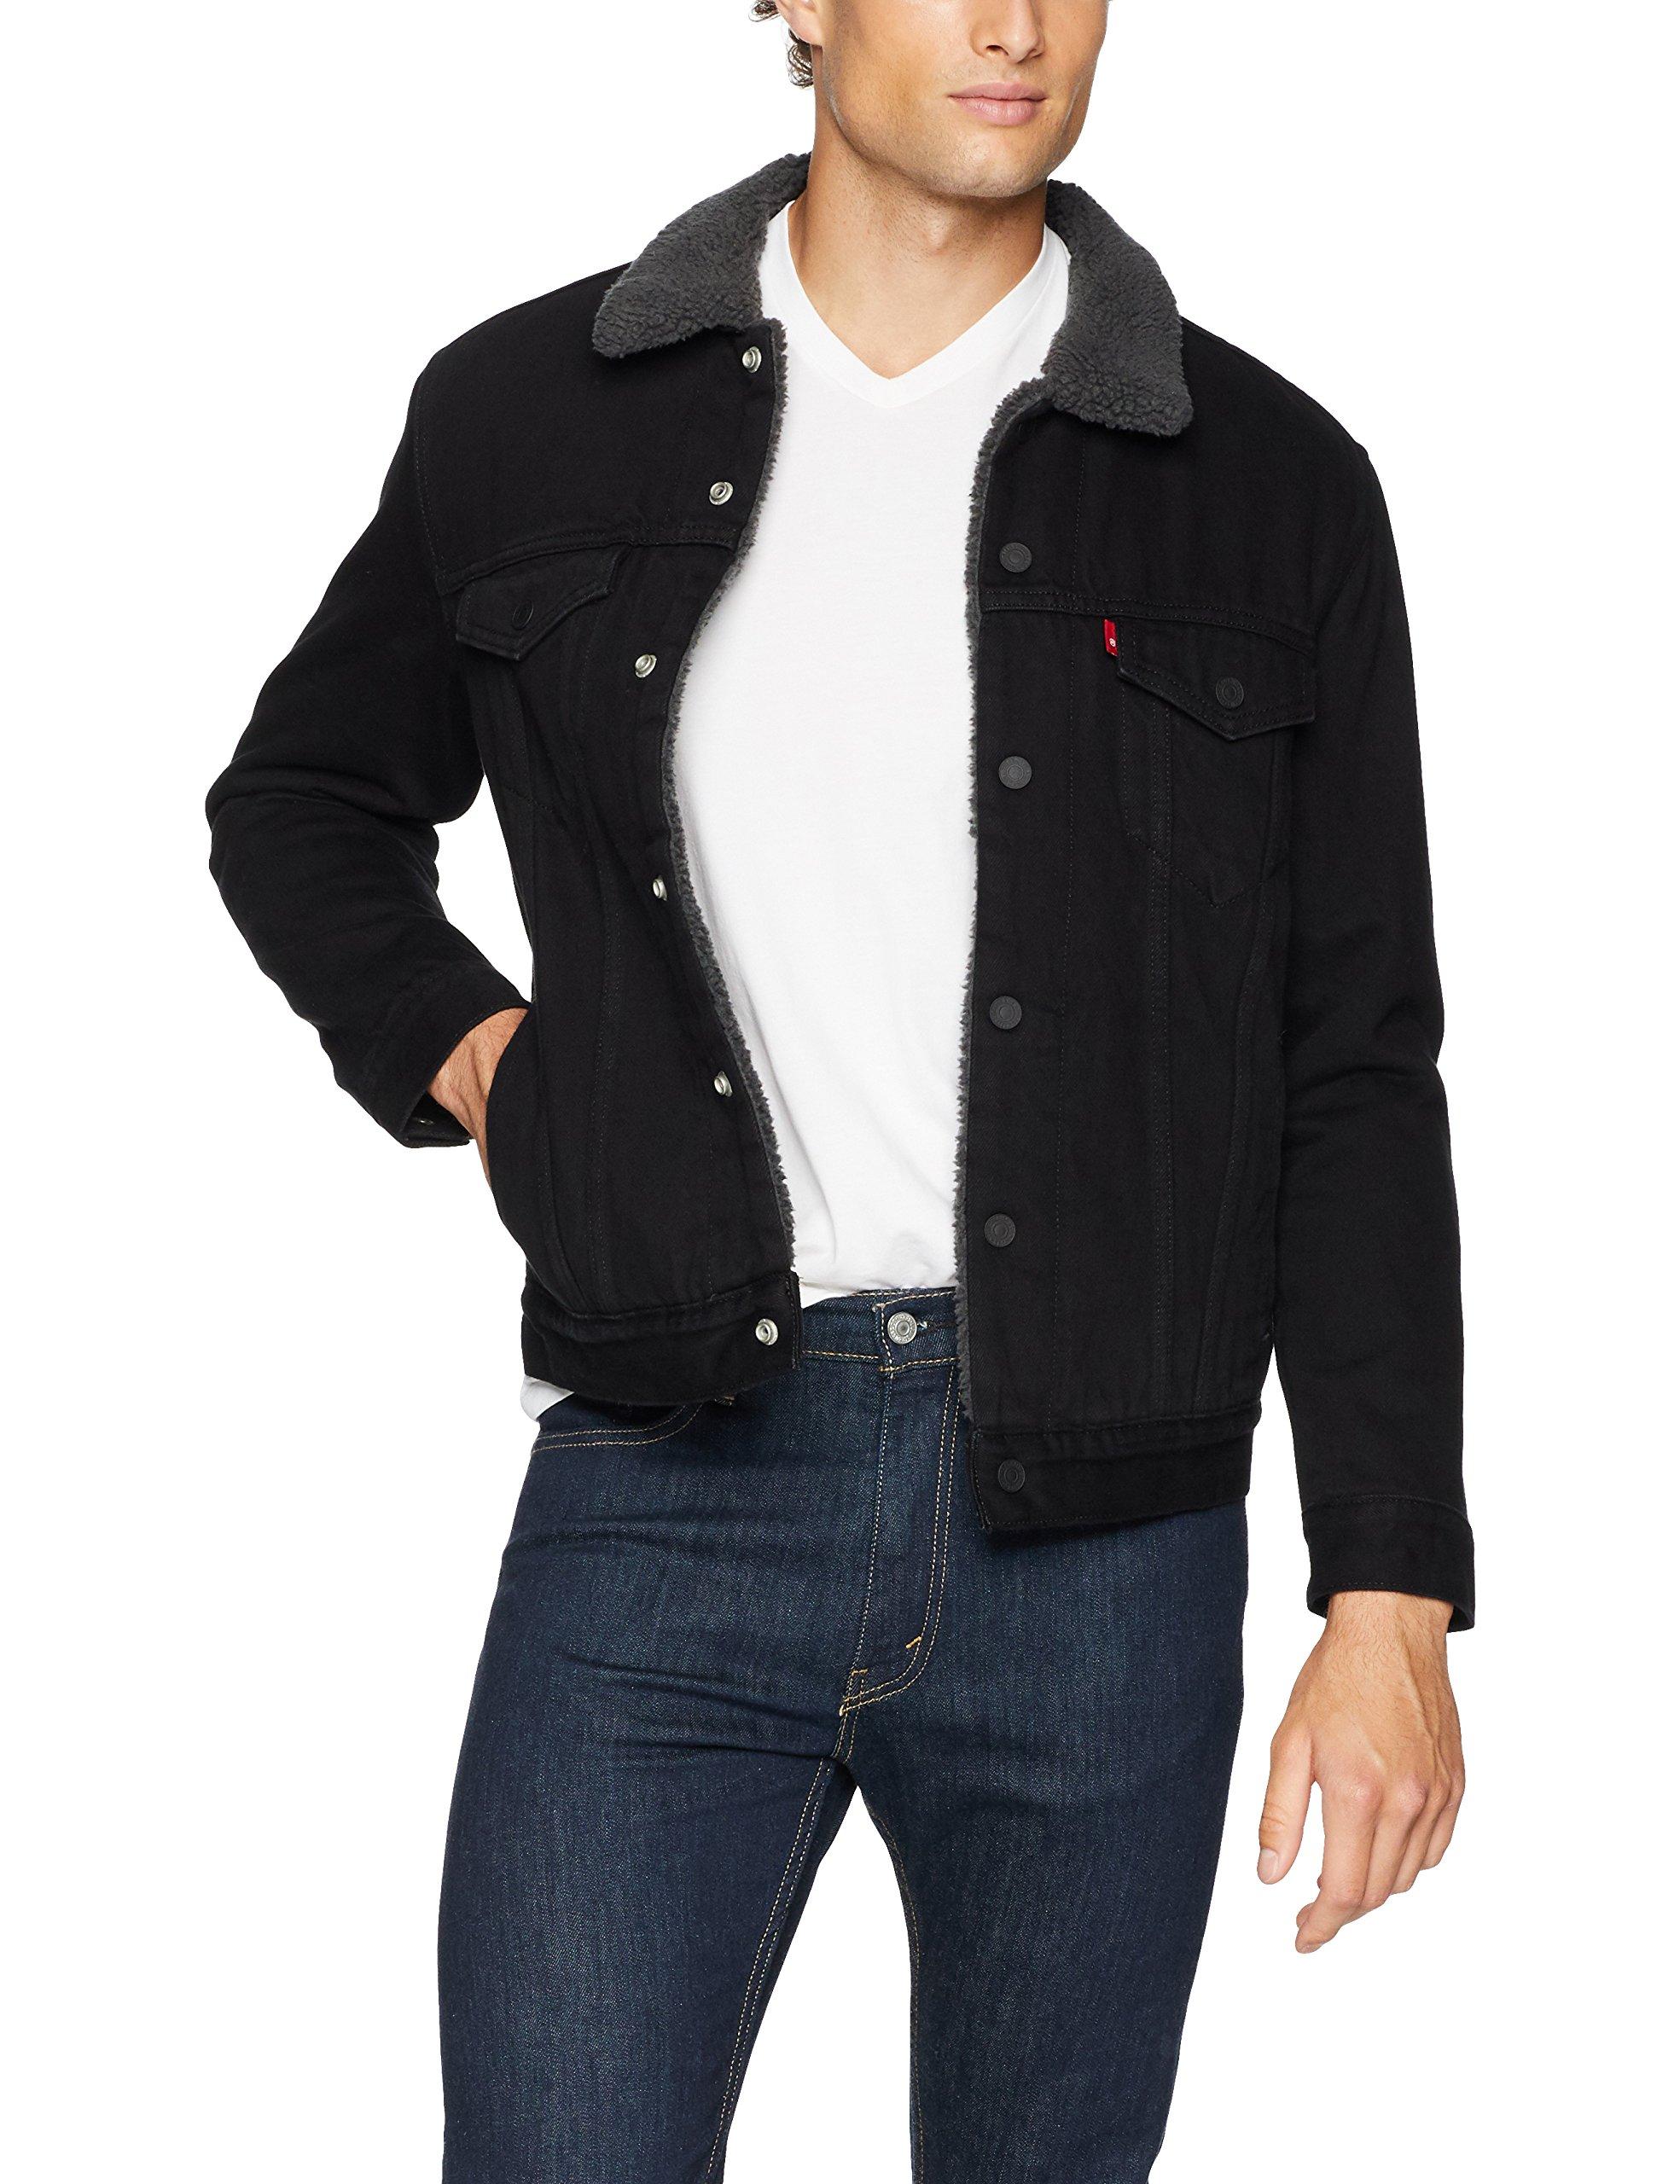 Levi's Type Iii Sherpa Jacket in Black for Men - Save 27% - Lyst